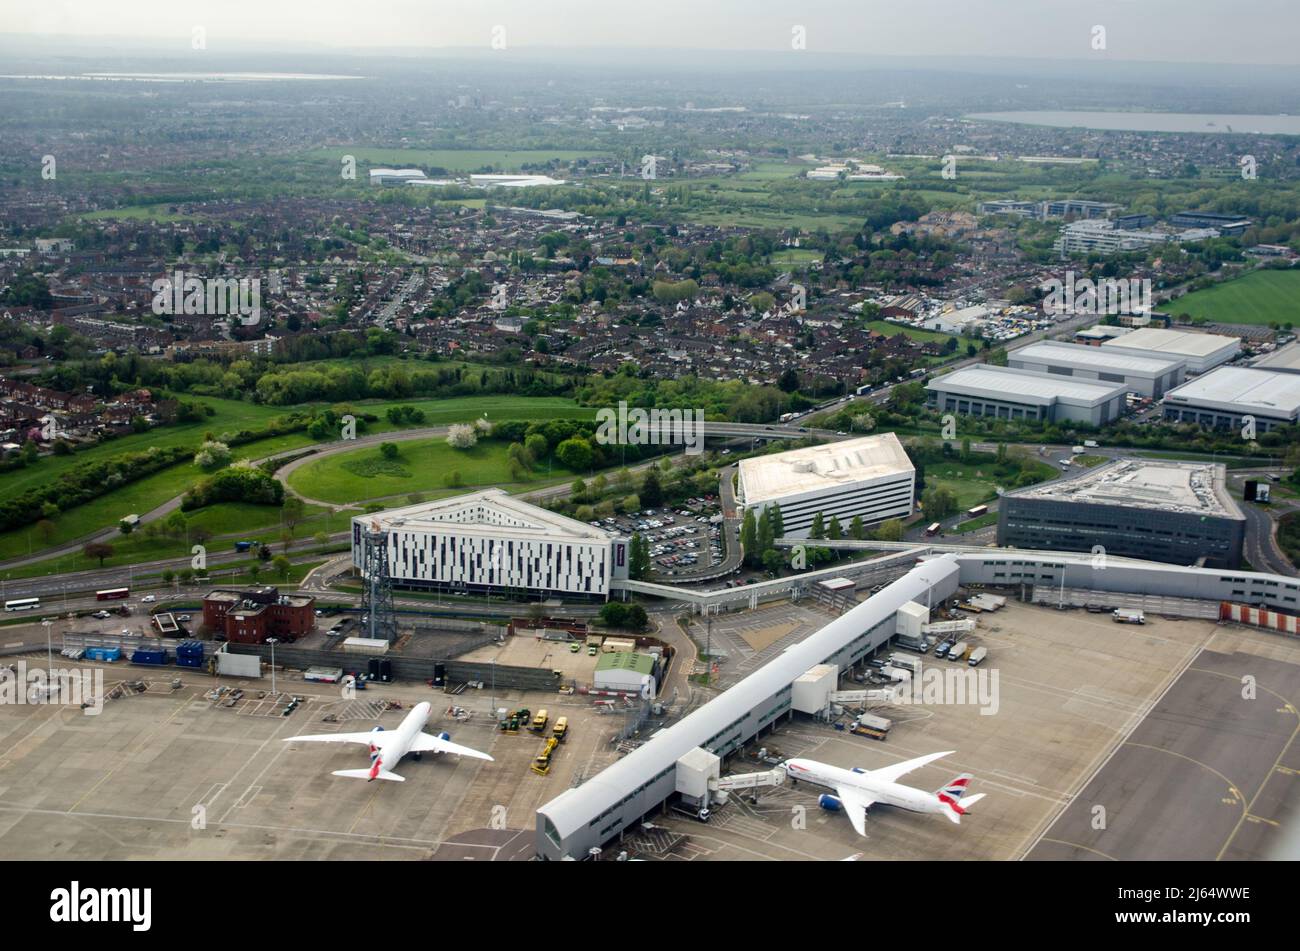 Aerial view of hotels close to Terminal 4 at Heathrow Airport, London. To the left is a branch of Premier Inn, the diamond shaped building is a Hilton Stock Photo